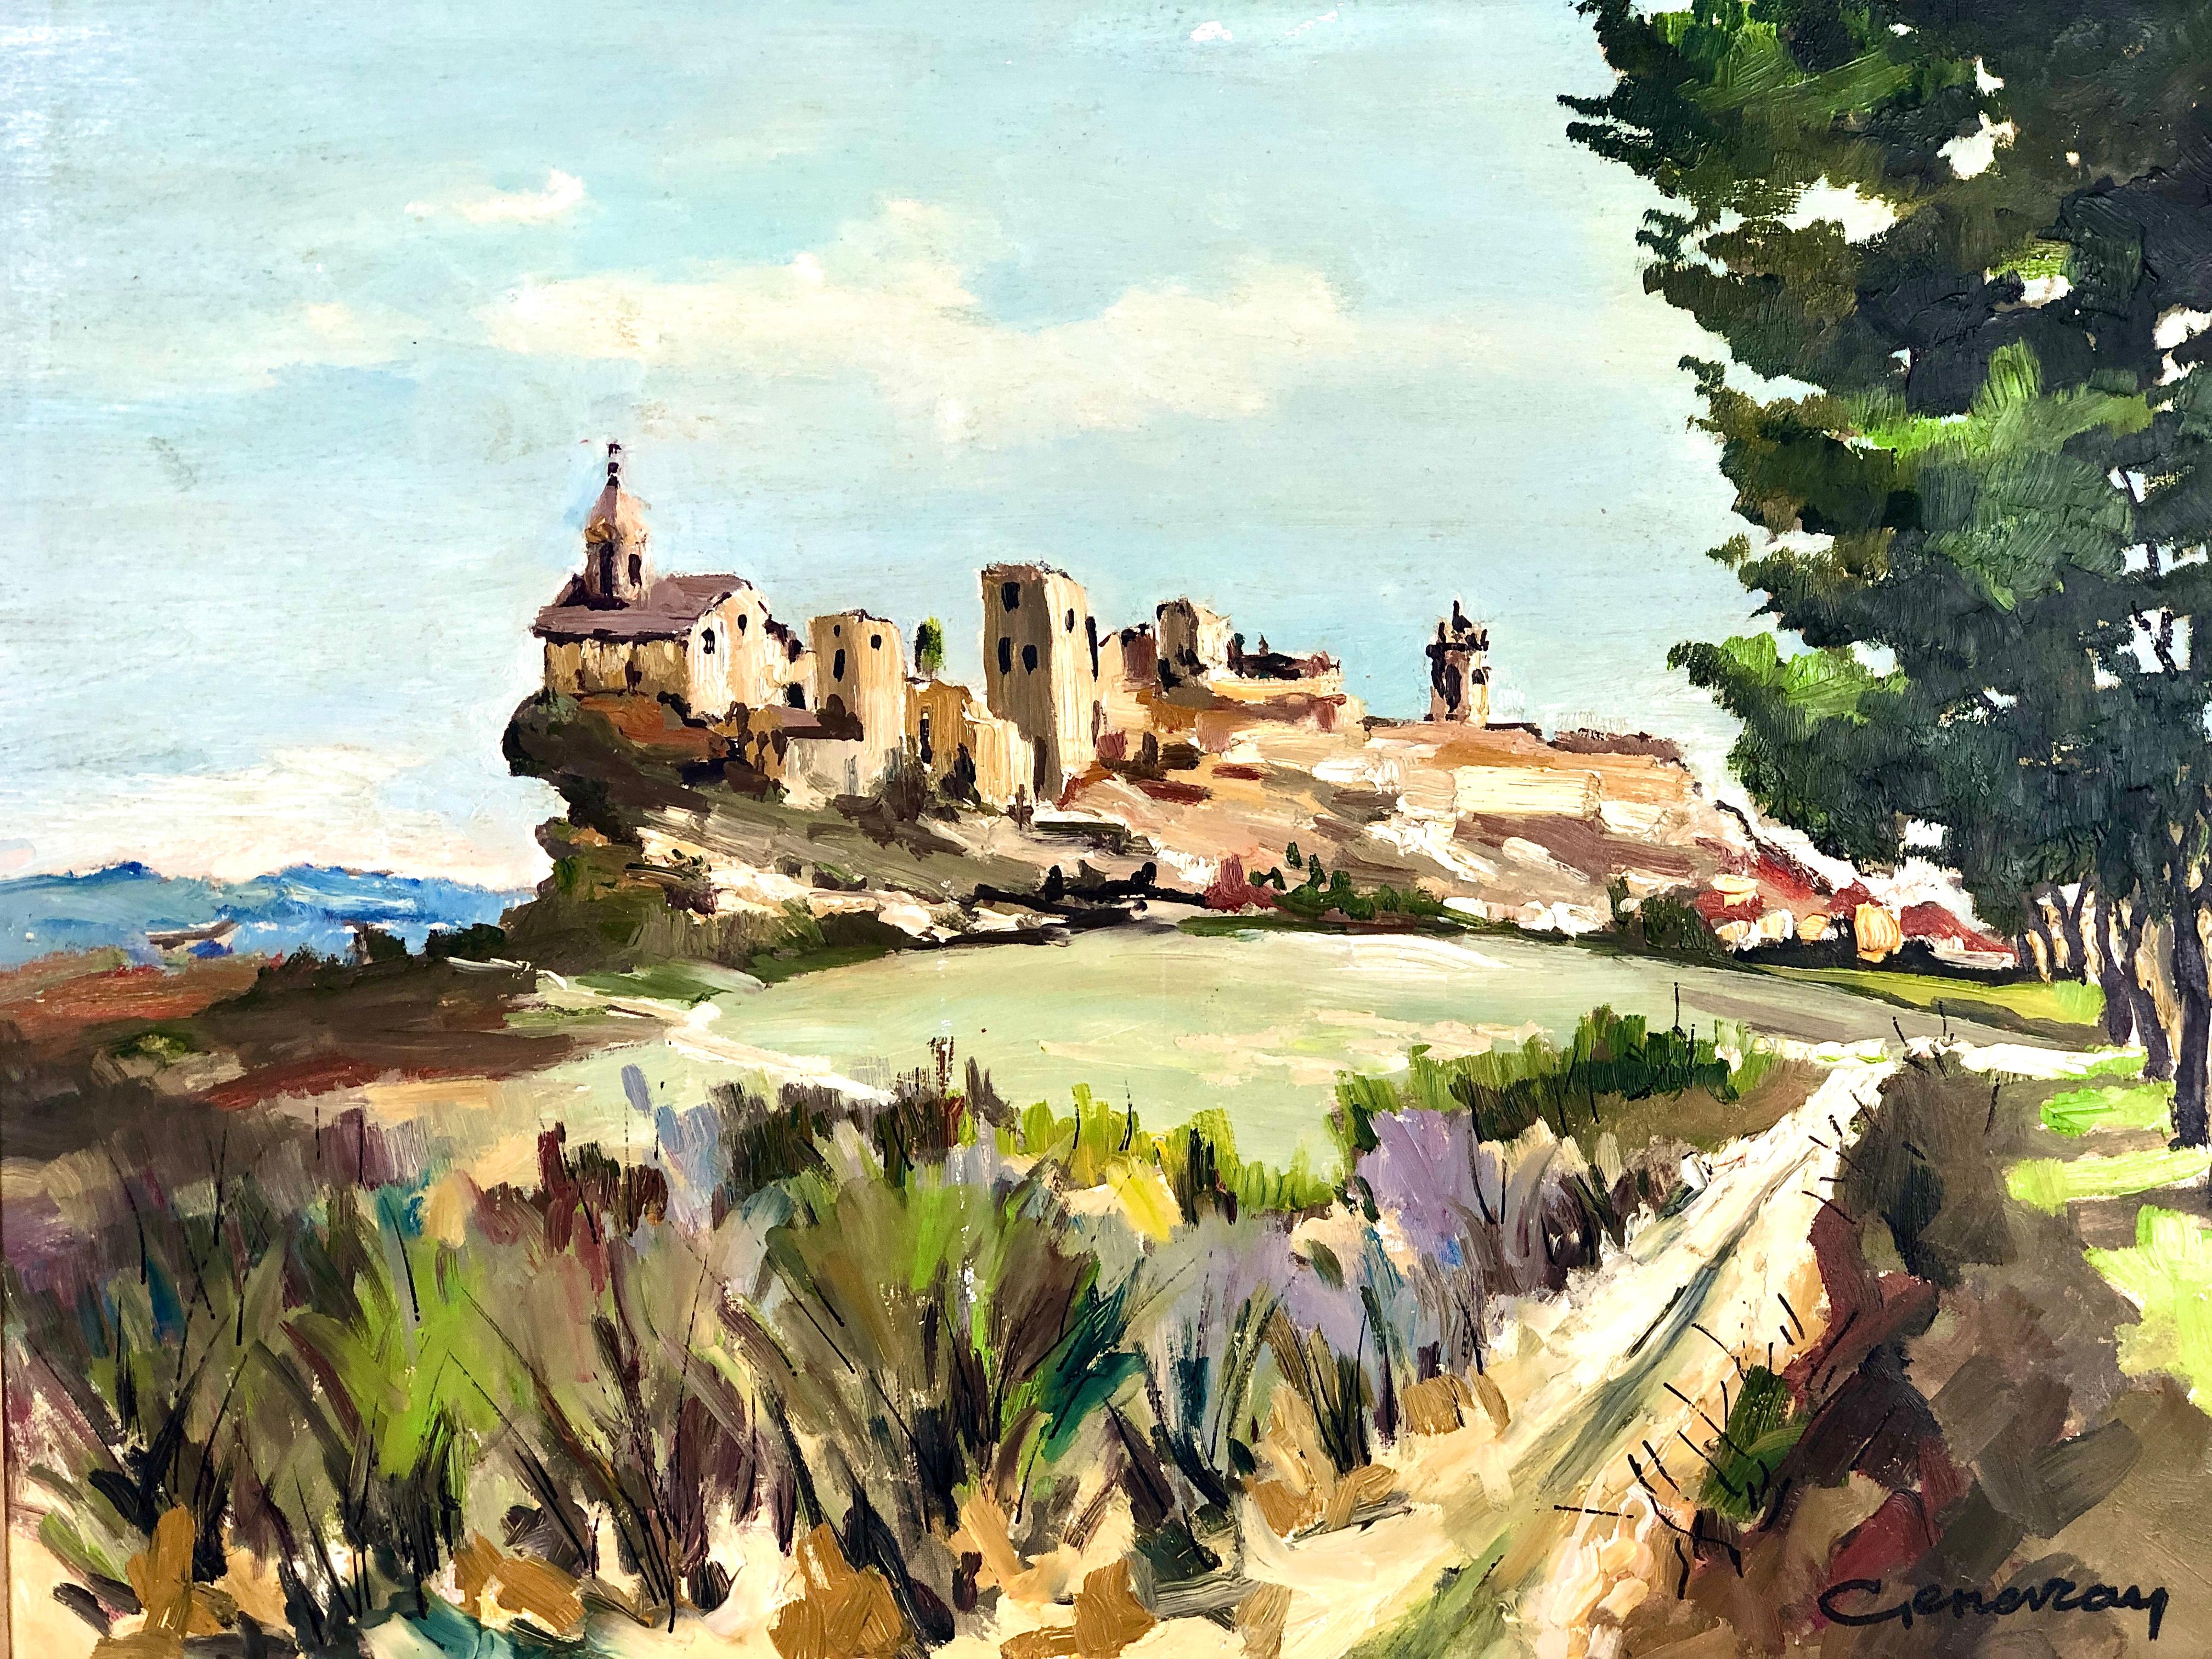 Oil on Canvas of an old village in Provence, signed on the lower right-hand corner, by Louis Genevray, a French artist born in 1867. There is a signature as well on the back of the painting.